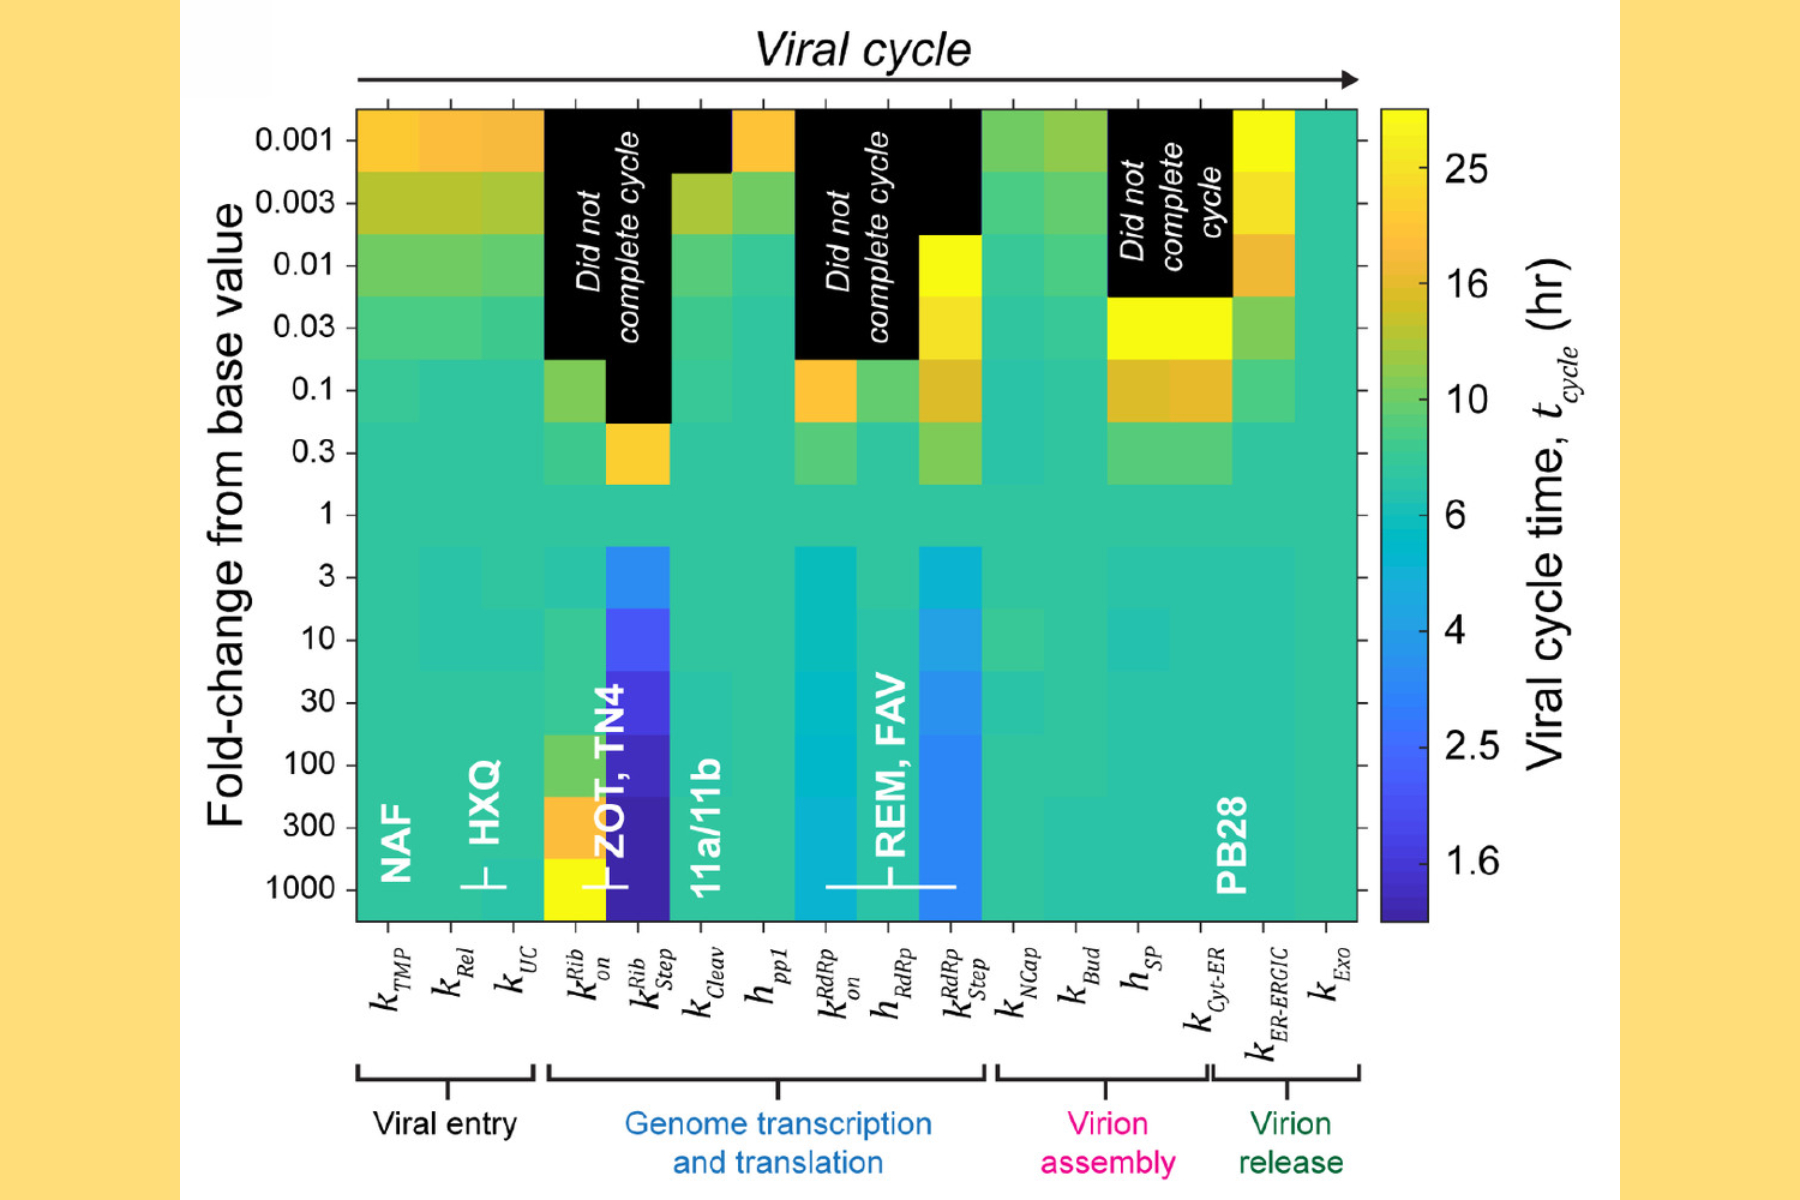 The simulator suggested that the COVID-19 therapies most likely to be effective are those that disrupt the genome transcription and translation stage of a SARS-CoV-2 virus’ life cycle. The graph shows key life cycle stages from left to right, and is color-coded to indicate how many hours it takes to produce 1,000 virions. The three black regions are high-ranked targets, including metformin, a drug that reduces translation. Annotations of example therapeutics show approximately when they influence the virus.